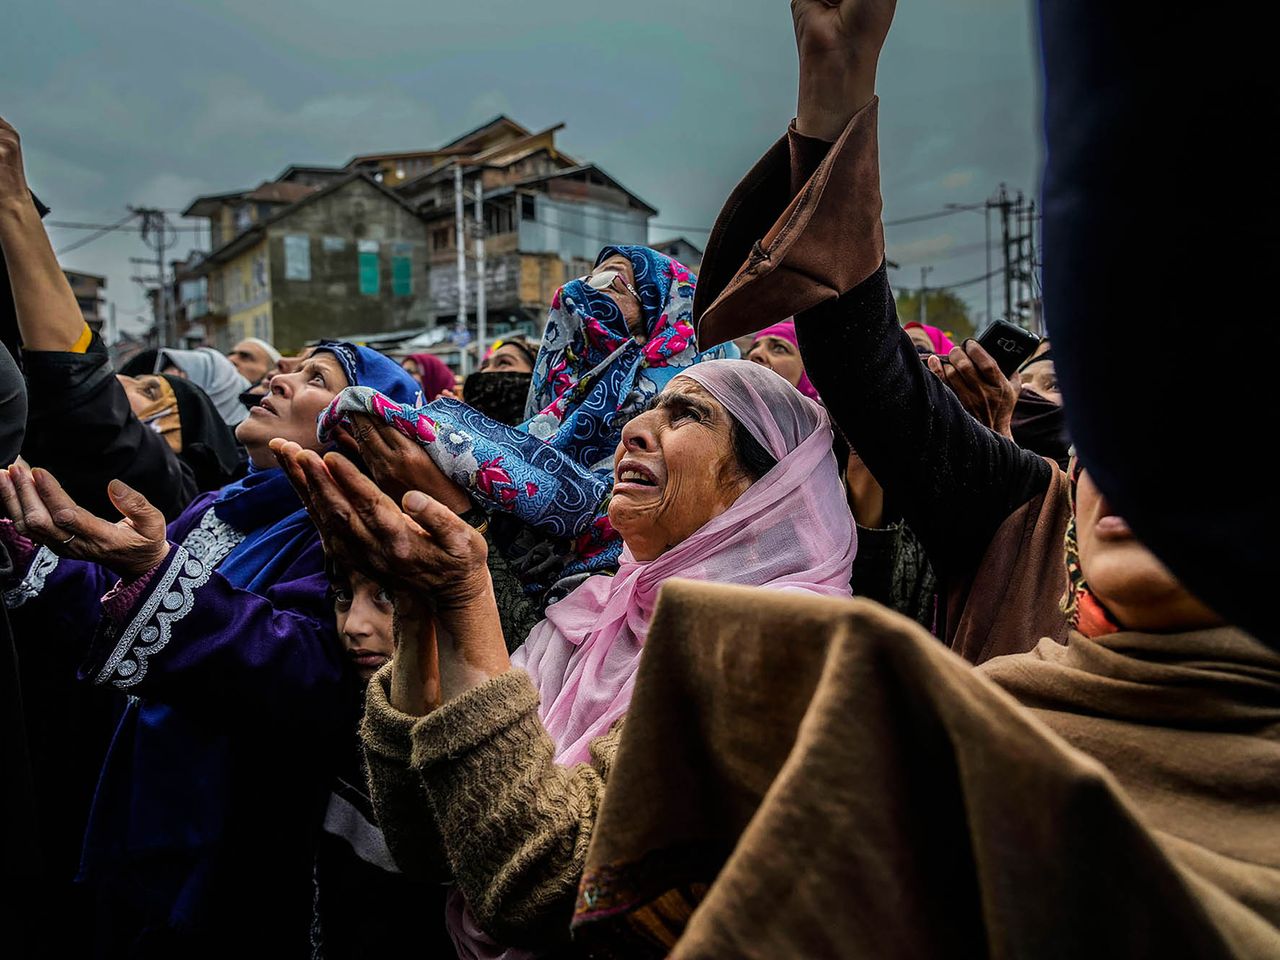 Kashmiri Muslim women devotees weep while praying as a priest displays a relic of Sufi saint Sheikh Syed Abdul Qadir Jeelani outside his shrine in Srinagar, Indian controlled Kashmir, Monday, Nov. 7, 2022. Hundreds of devotees have gathered at the shrine for the 11-day festival that marks the death anniversary of the Sufi saint. This project documents ongoing unrest in the long-disputed region of Kashmir, dating back to 1947, when India and Pakistan gained independence from Britain. Both nations claim Kashmir in its entirety, and each administers a portion of the region. In Indian-administered Kashmir, rebels have been fighting Indian rule for decades, seeking to unite the territory, either under Pakistani rule or as an independent country. India says that Pakistan supports armed insurgency in Kashmir. Pakistan denies the charge, saying it provides moral and diplomatic support only.